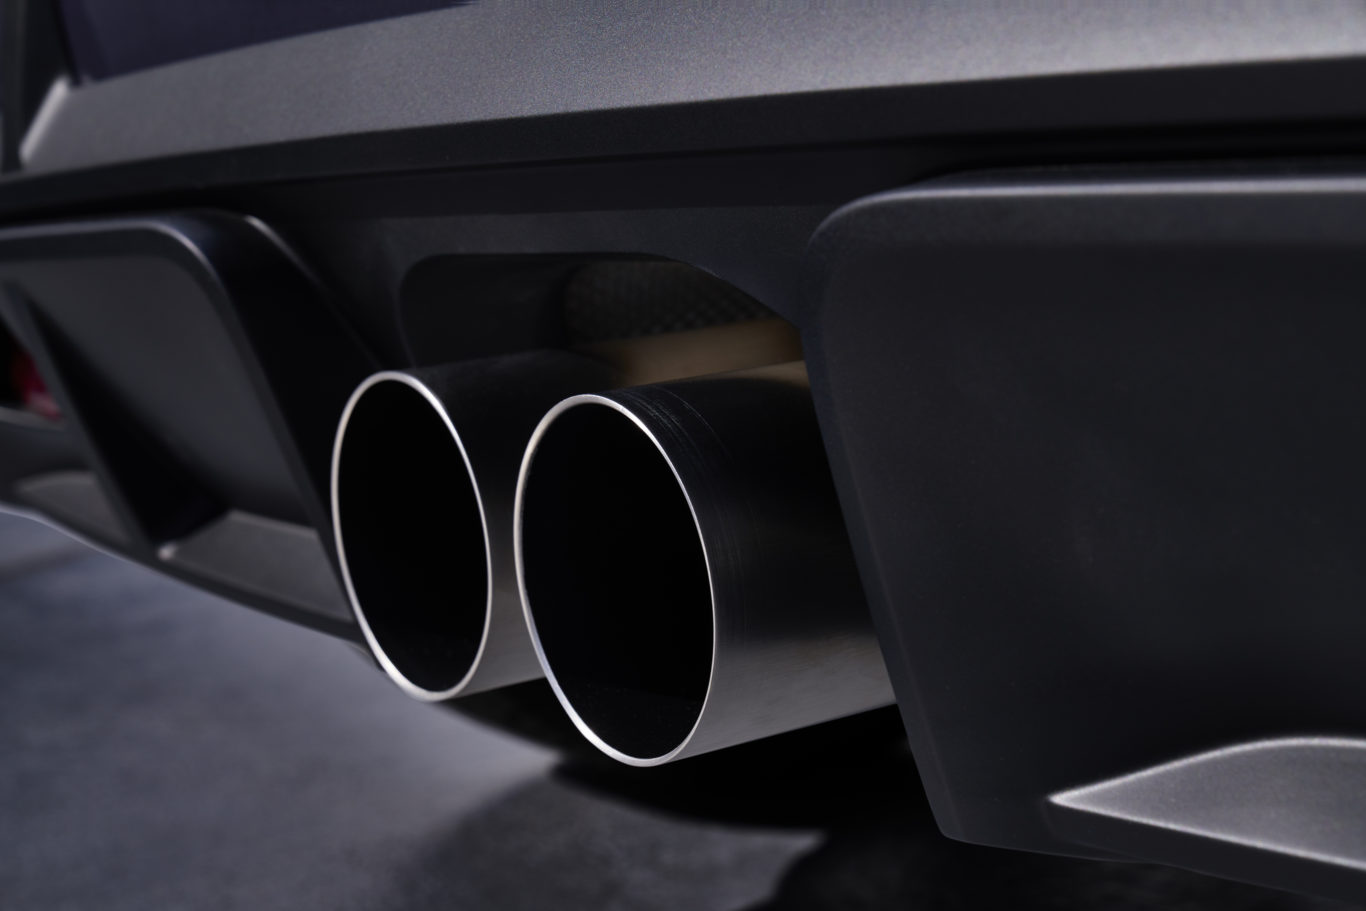 A new exhaust system will give a more vocal soundtrack